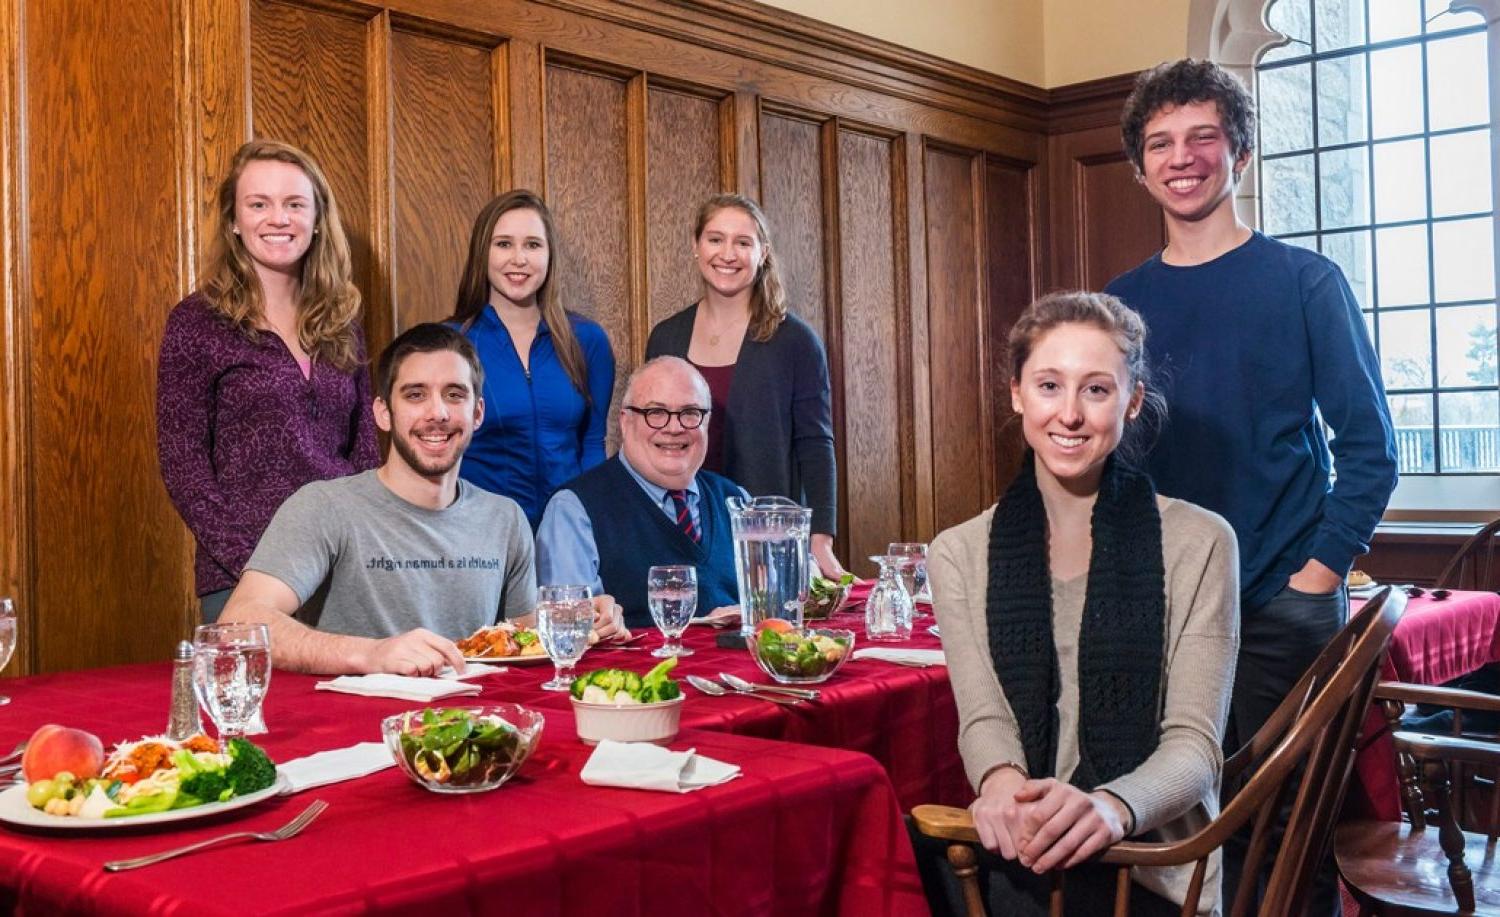 A group of BC undergraduates with Fr. Mark Massa, S.J., at a "Lunches with Jesuits" event